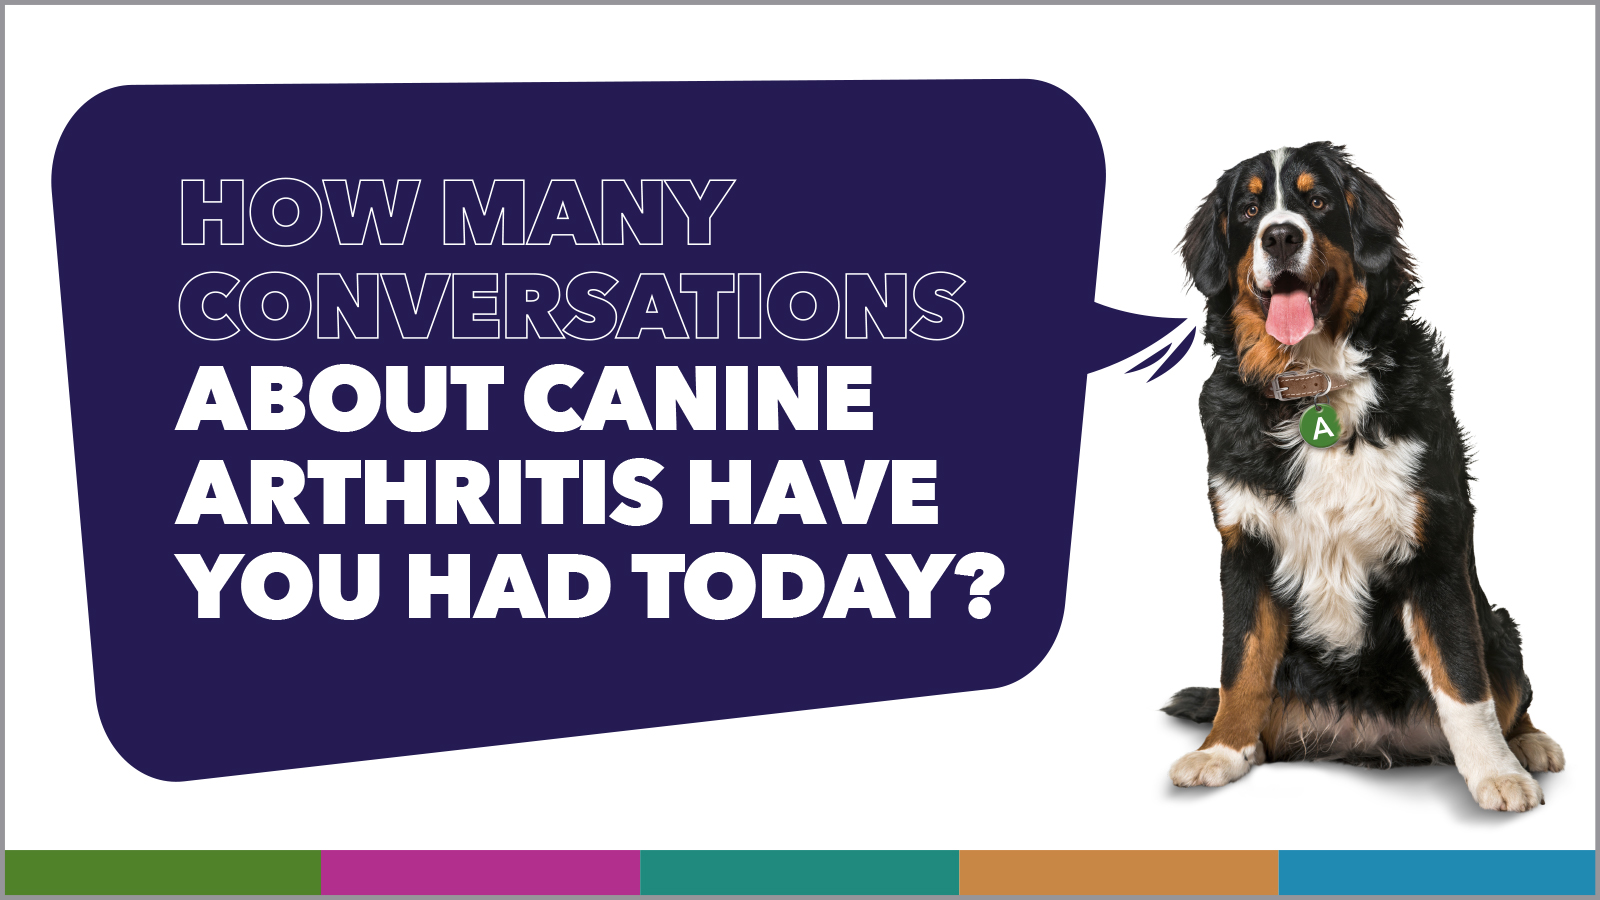 How many conversations about canine arthritis have you had today? Click to view the video